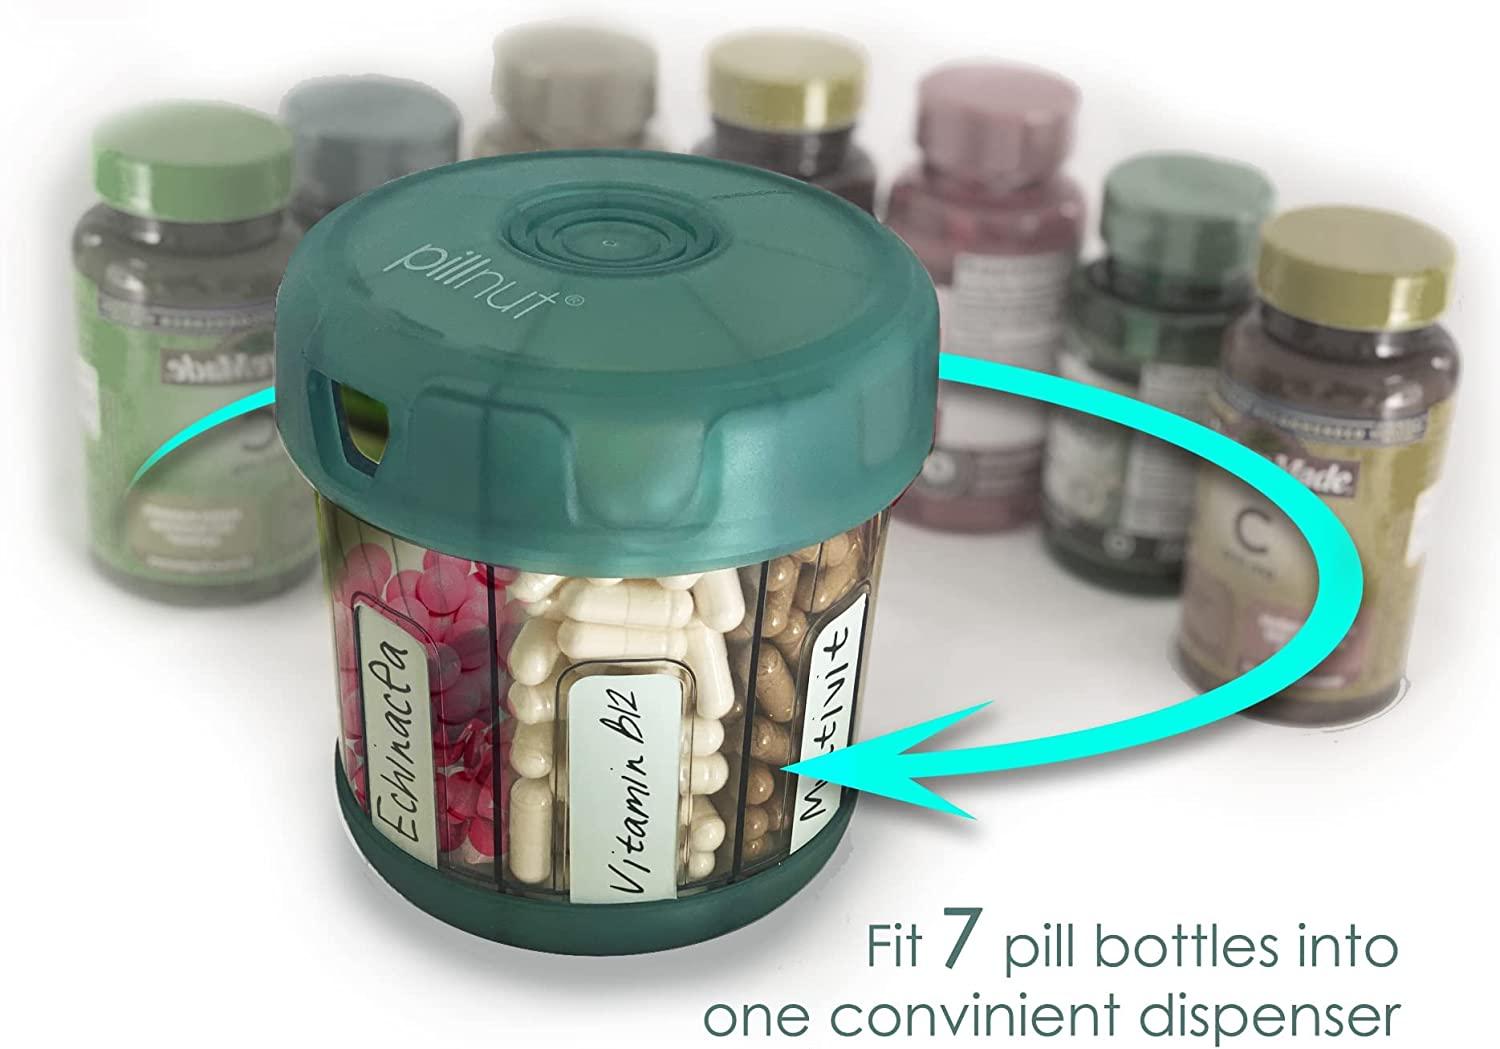 PULIV Large Supplement Organizer Bottle, Holds Plenty of Vitamins in 1  Monthly Pill Dispenser with Anti-Mixing & Wide Openings Design, Easy to